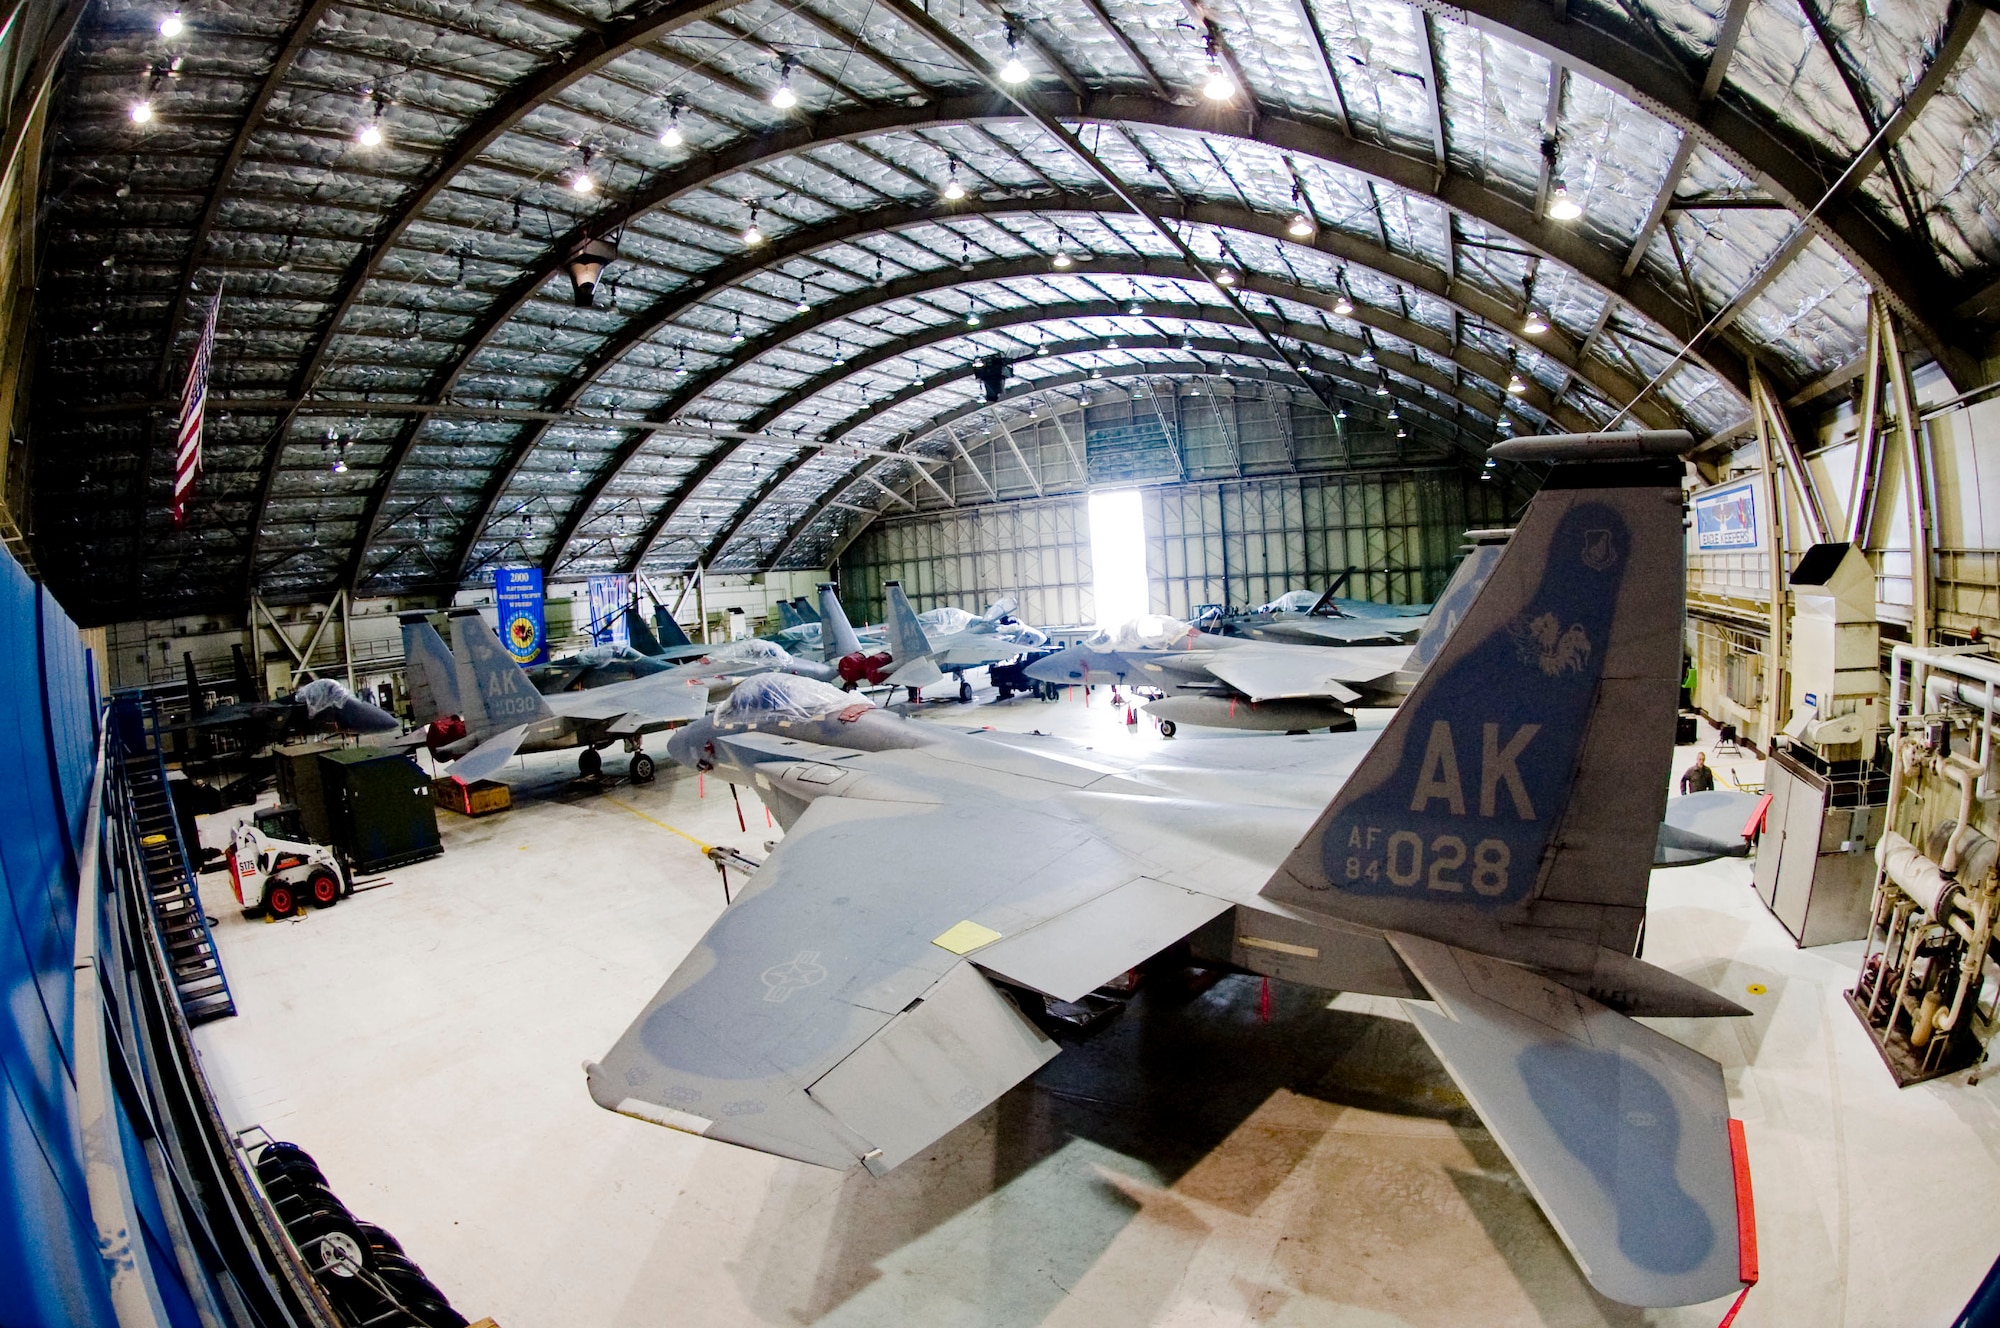 ELMENDORF AIR FORCE BASE, Alaska-- F-15s and maintenance equipment from the 19th Fighter Squadron are sheltered inside the hanger due to the March 23 eruption of Mount Redoubt. Aircraft on Elmendorf are being sheltered in place and plans are being made to close the airfield if necessary. (U.S. Air Force photo by Senior Airman Jonathan Steffen)

